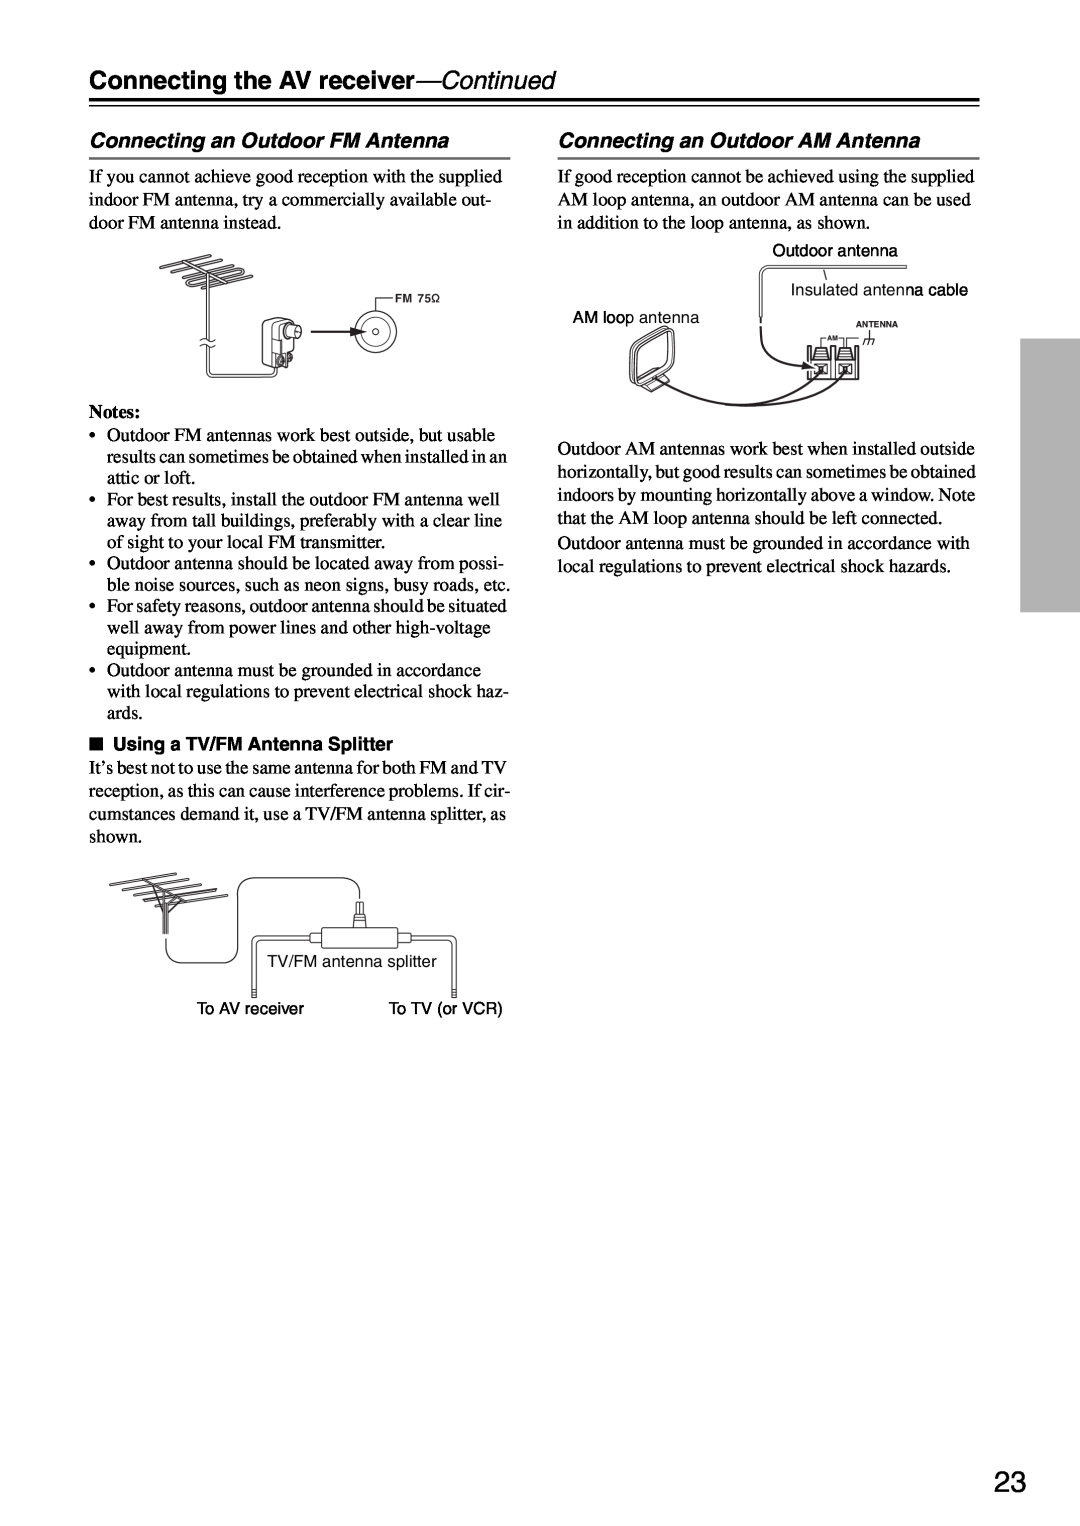 Integra DTR-5.8 Connecting an Outdoor FM Antenna, Connecting an Outdoor AM Antenna, Connecting the AV receiver-Continued 